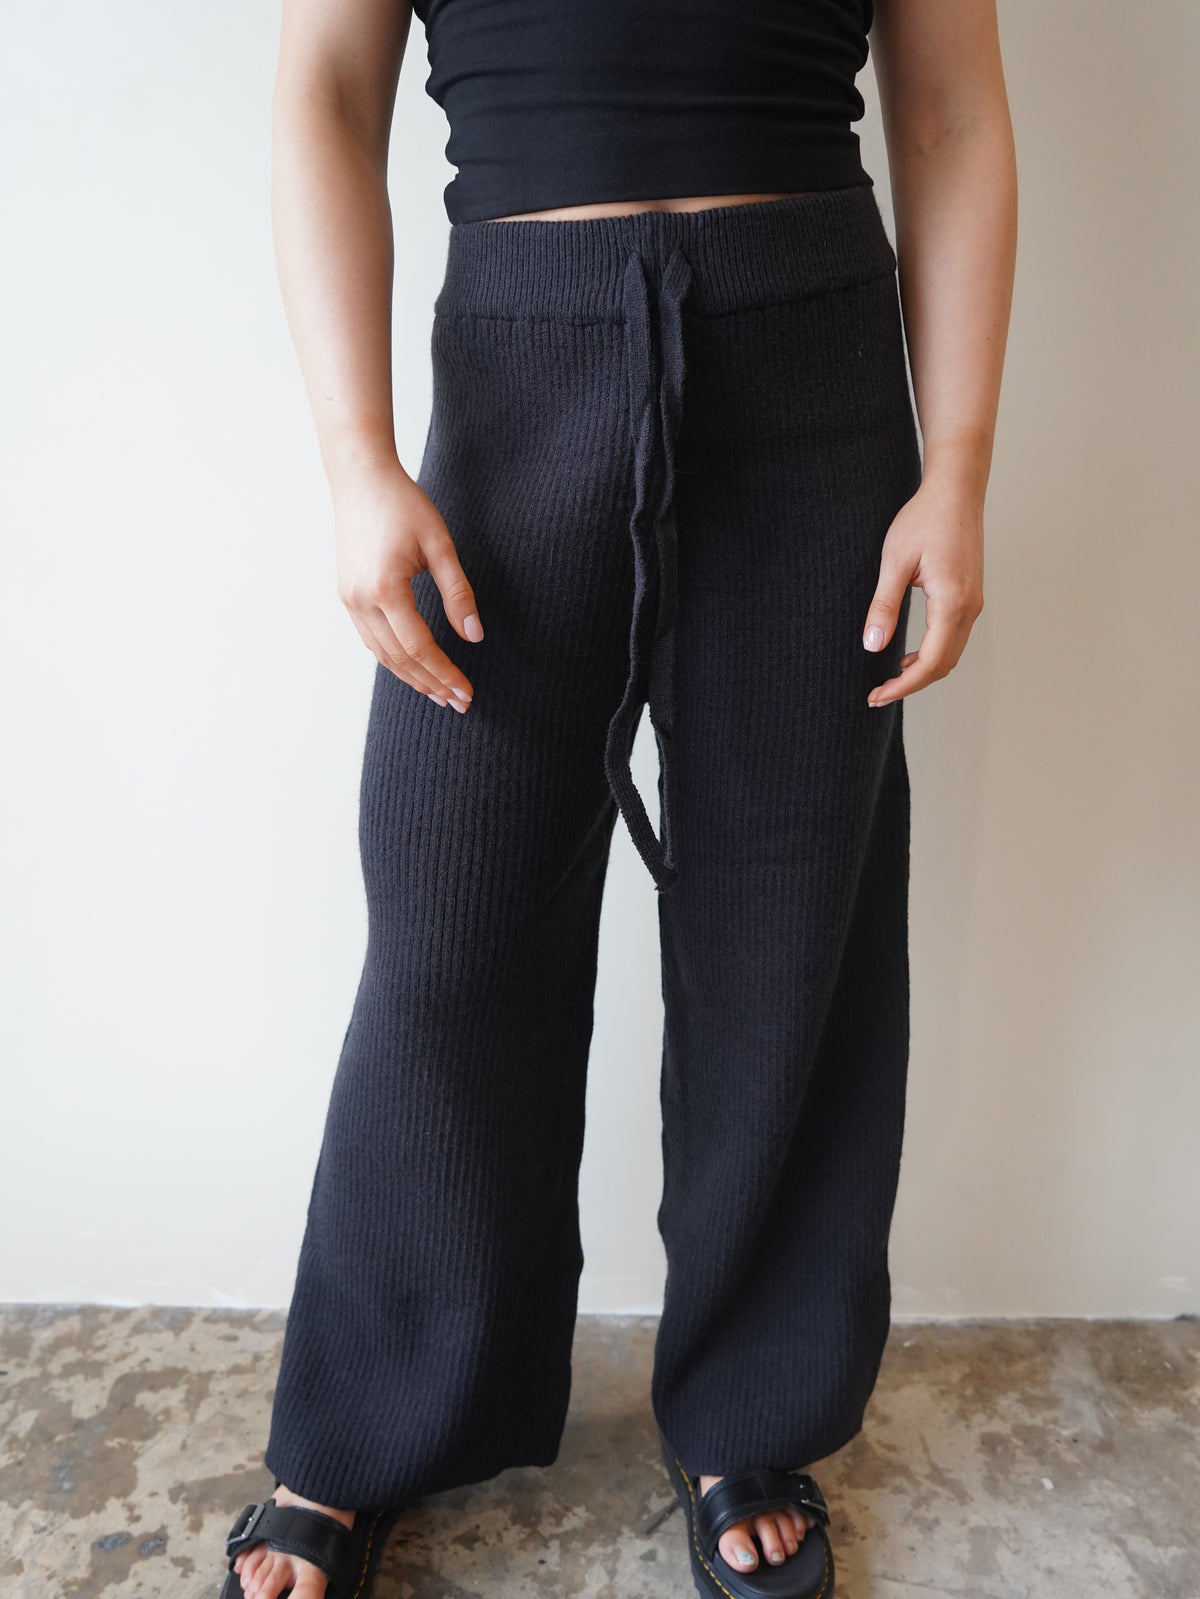 CALEIGH KNIT PANTS